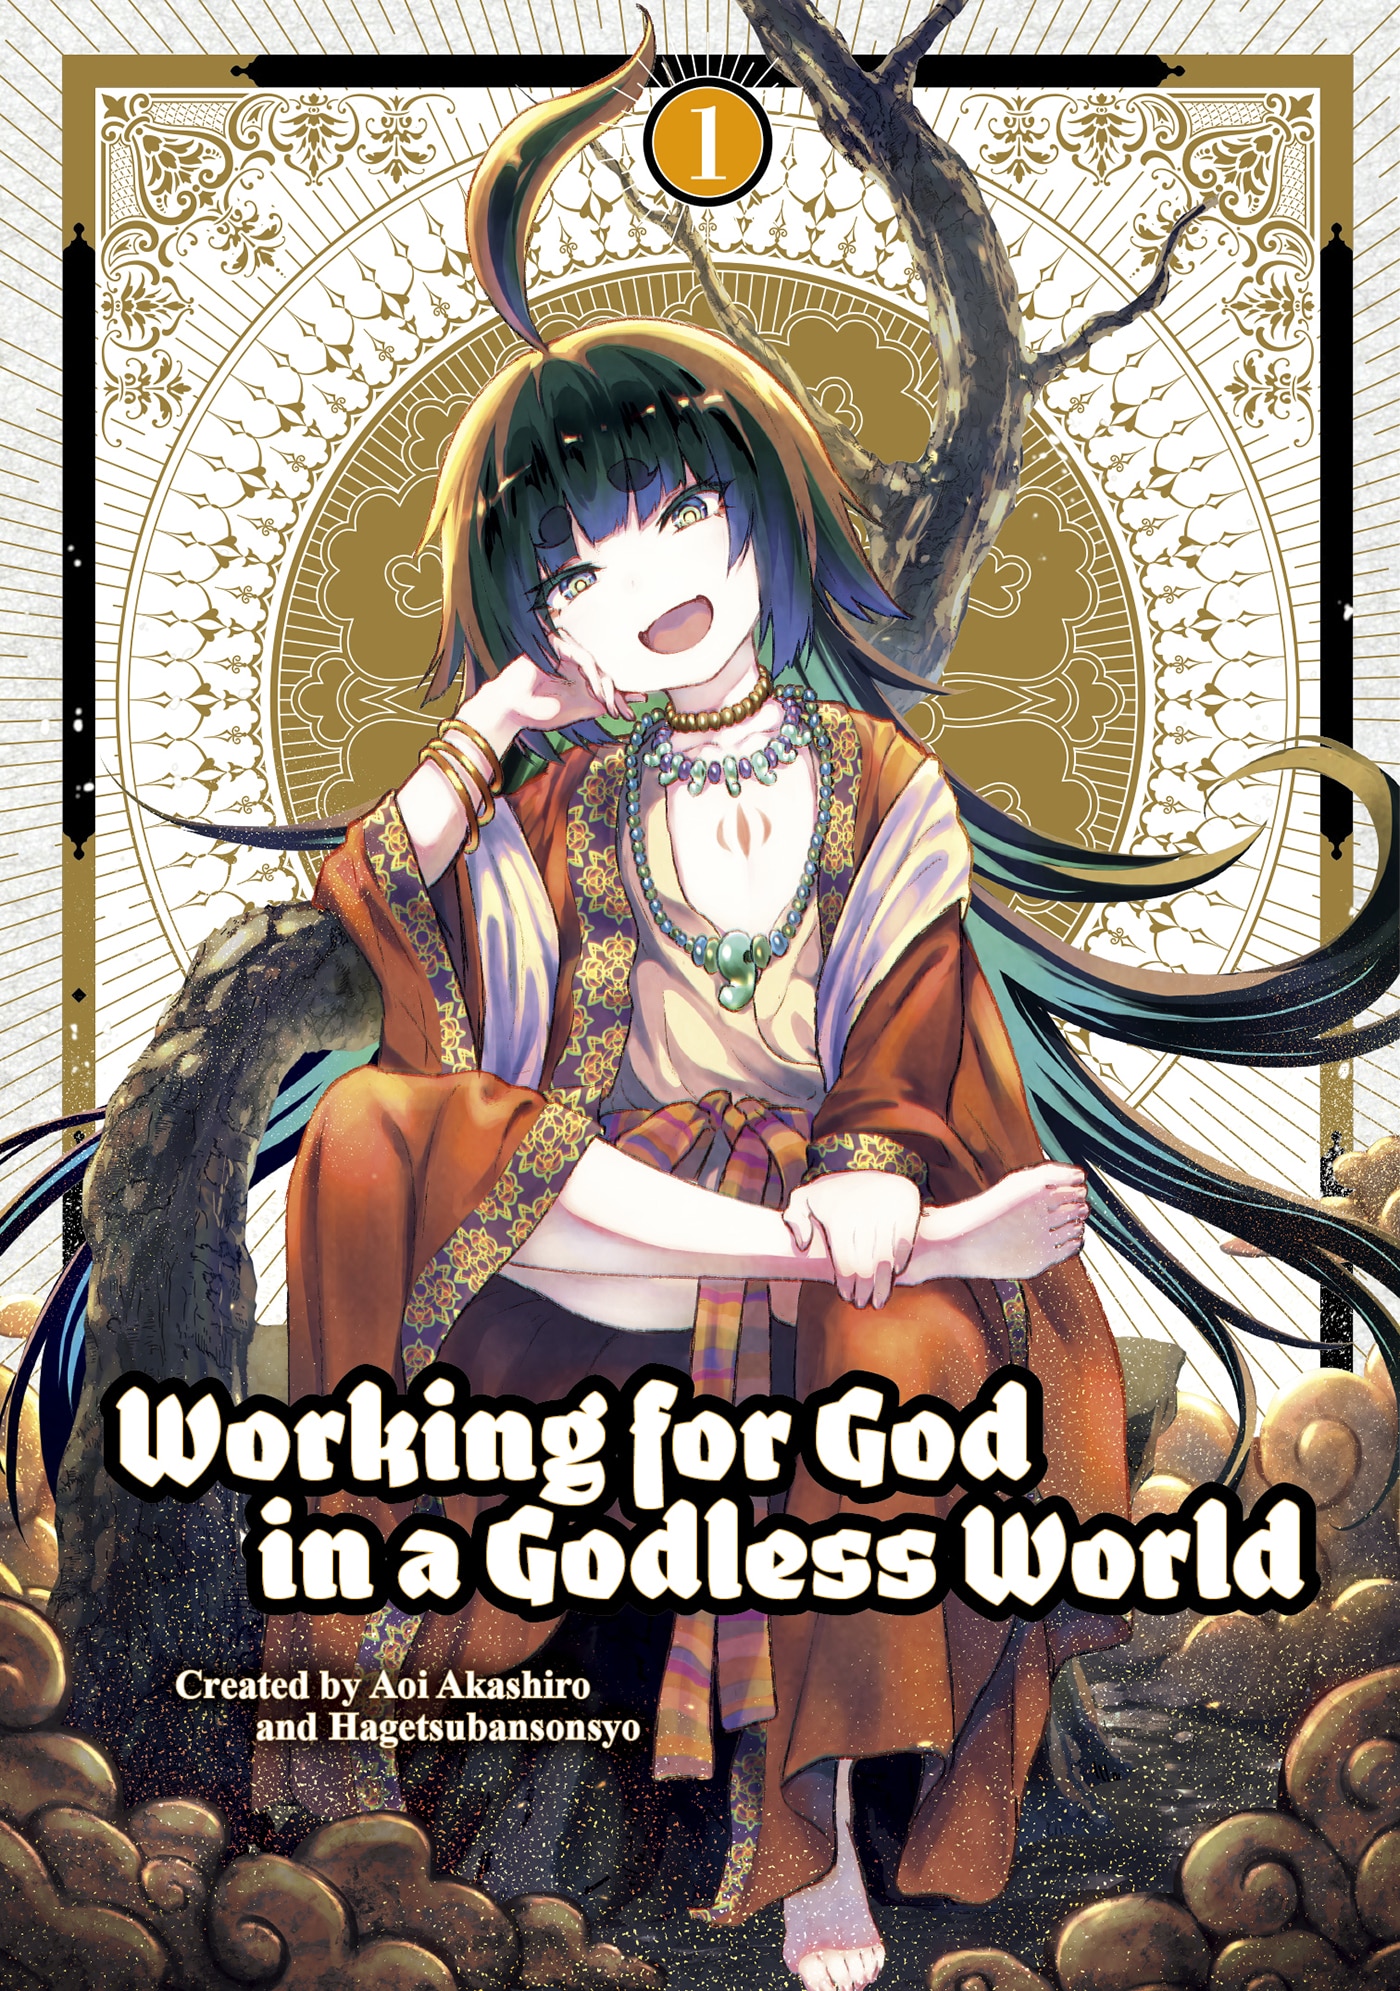 Mitama on cover of Working for God in a Godless World Vol 1